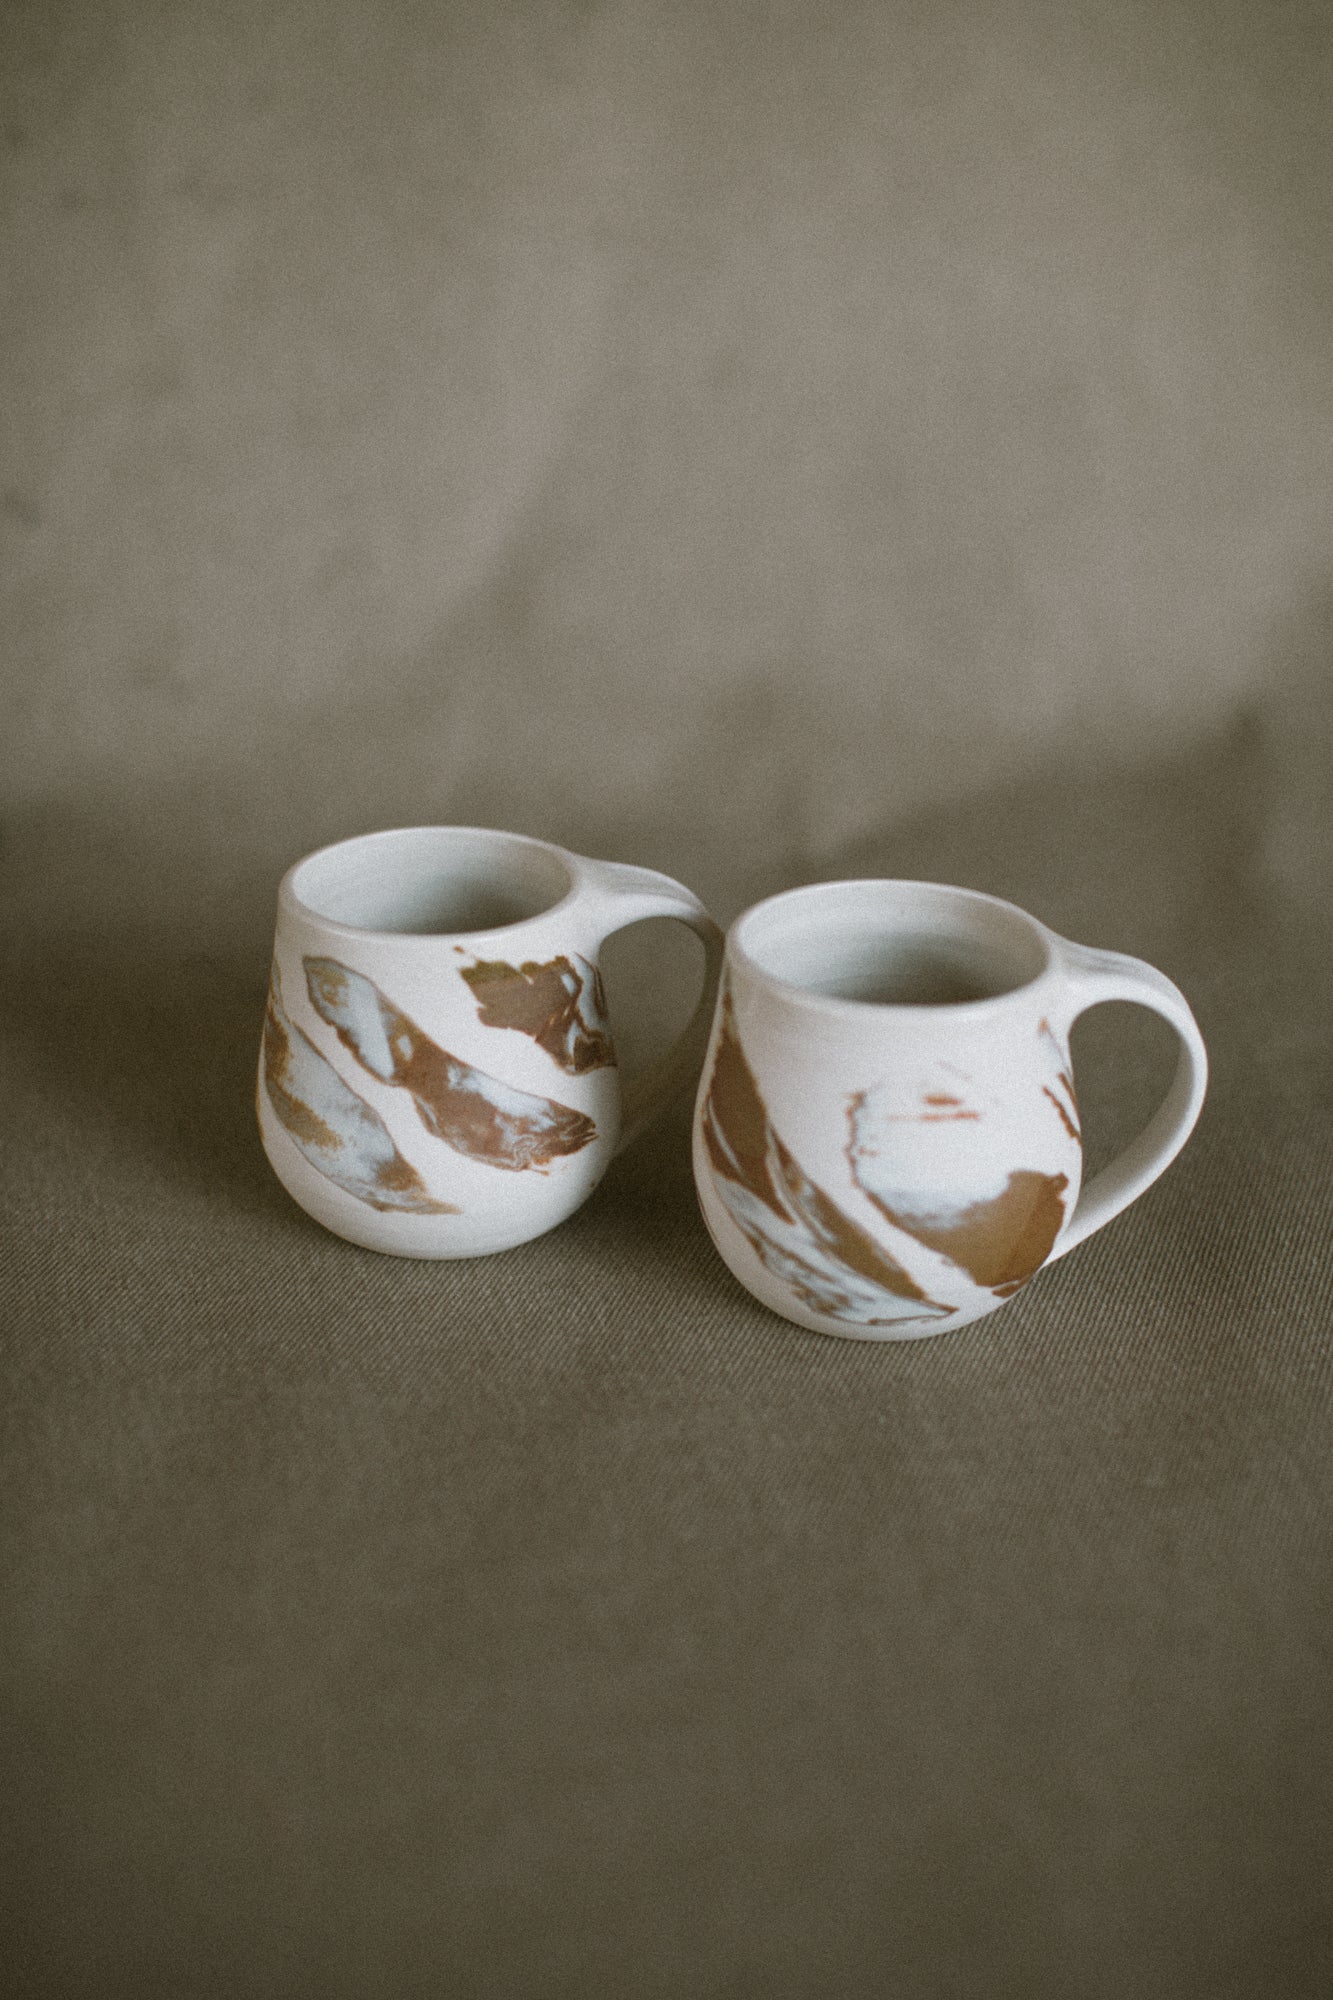 Two white and brown mugs on a beige fabric background. The pieces are made from white Australian stoneware clay with brown and white marbled clay inlaid during the throwing process.